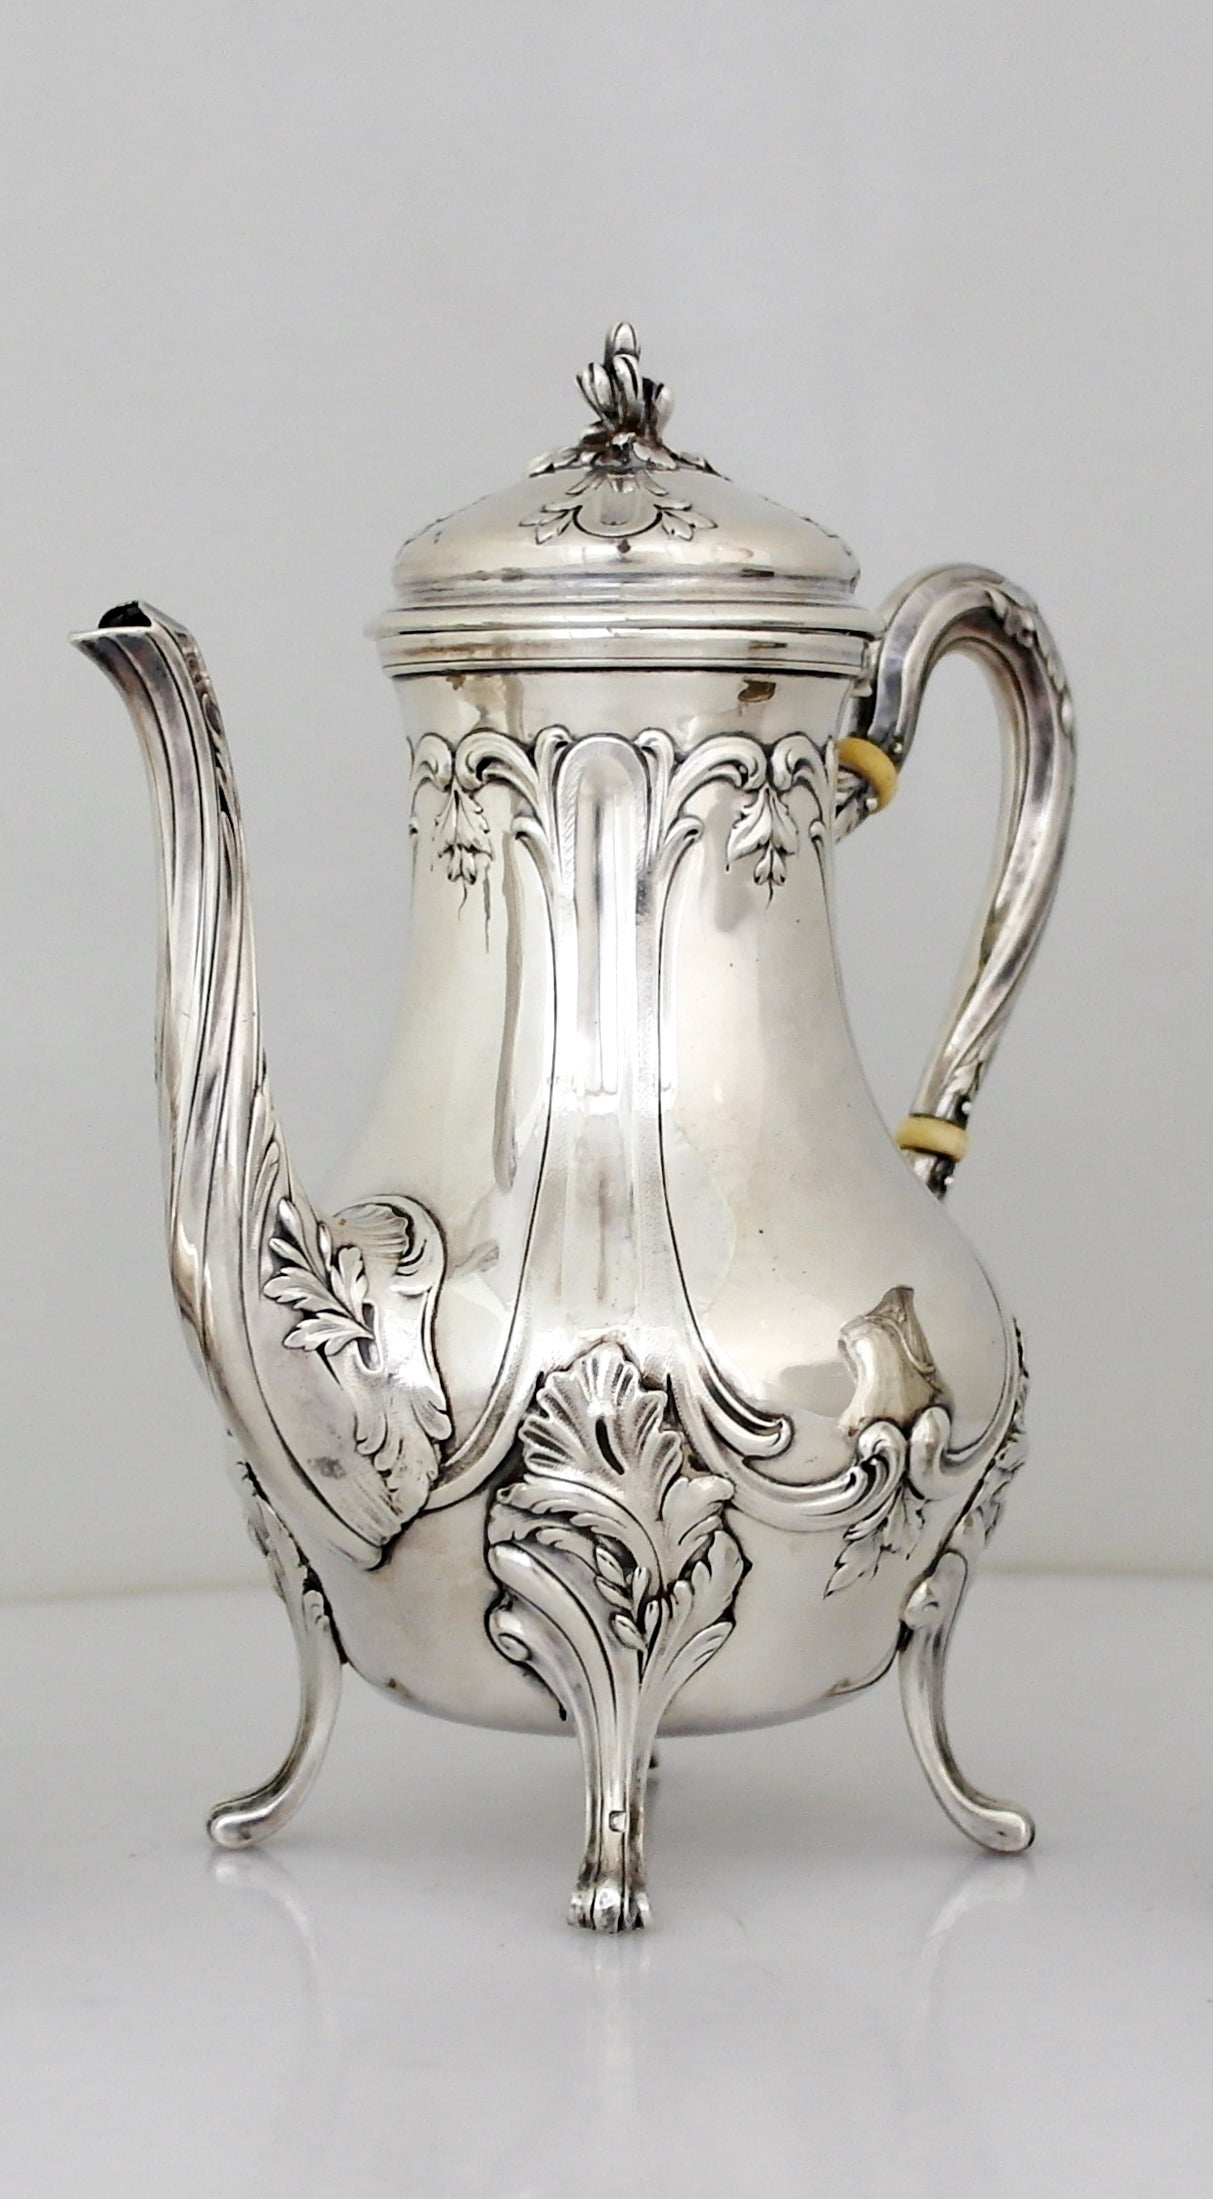 Being offered is a .950 silver (better than sterling) tea set by Emile Puiforcat of Paris, France. Made by France's most renowned silversmith, incredible tea set comprising a tea pot, creamer and sugar all in a Rococo style decorated with acanthus